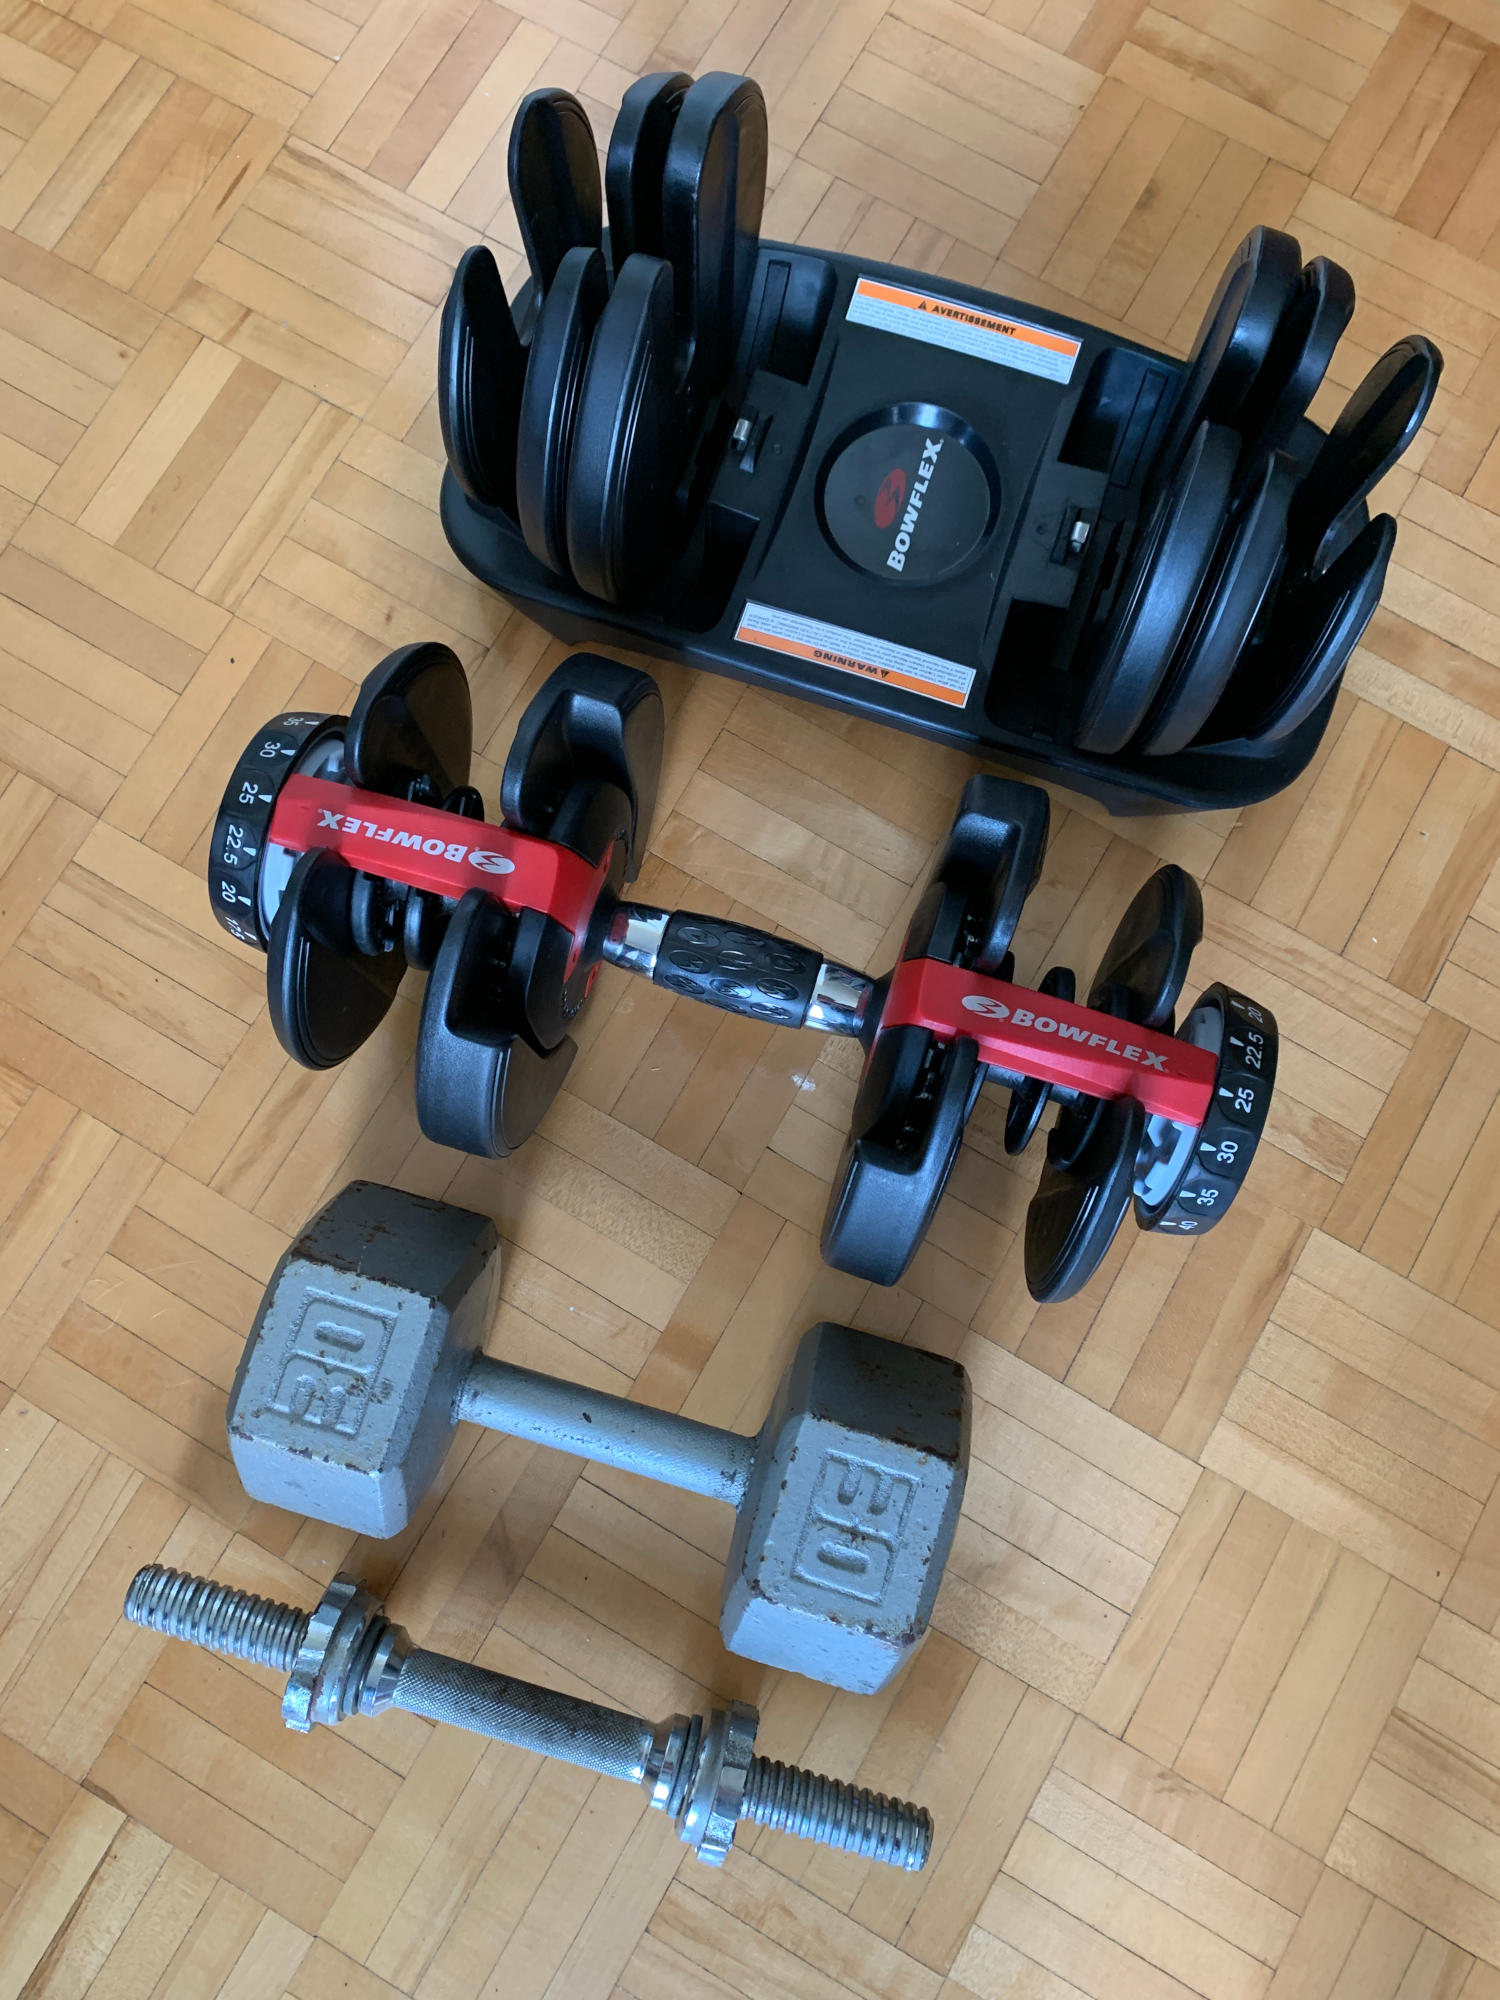 adjustable dumbbells set to 25 lb., sitting next to the tray with the remaining plates, with a 30 lb. standard dumbbell and a twist-on dumbbell spindle (both smaller) for size comparison.